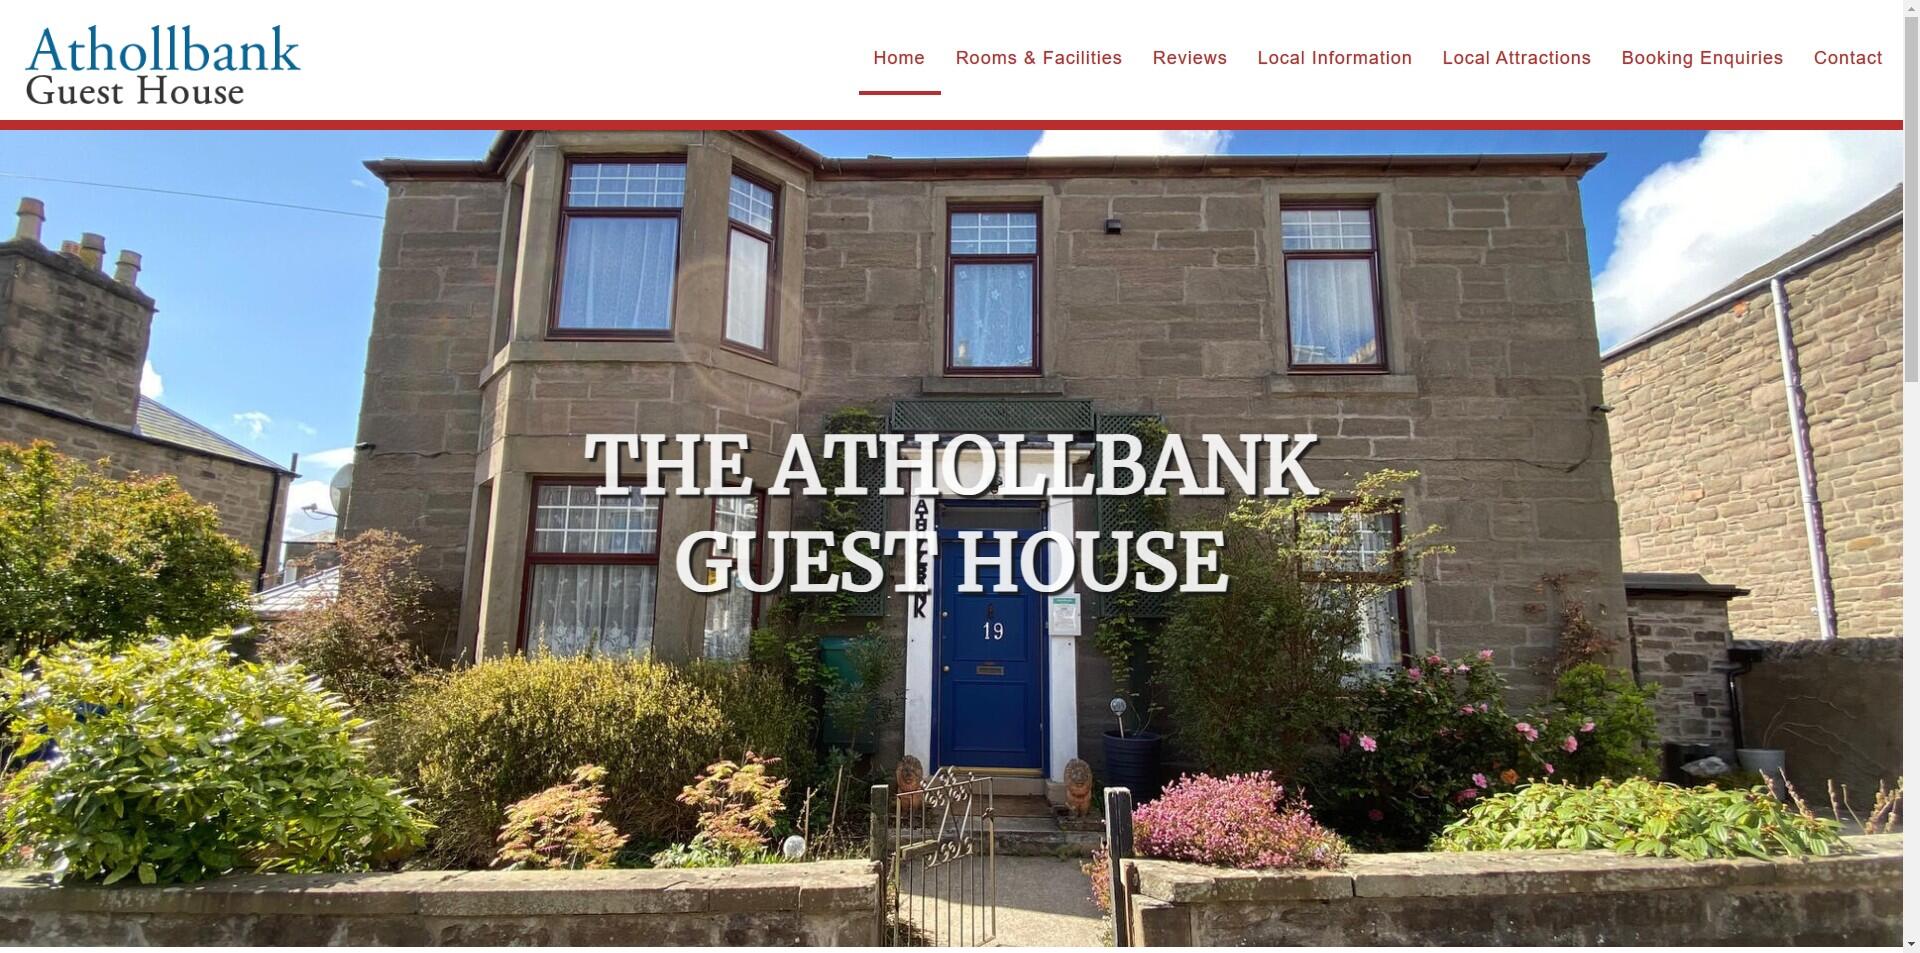 website designed for Athollbank Guest House